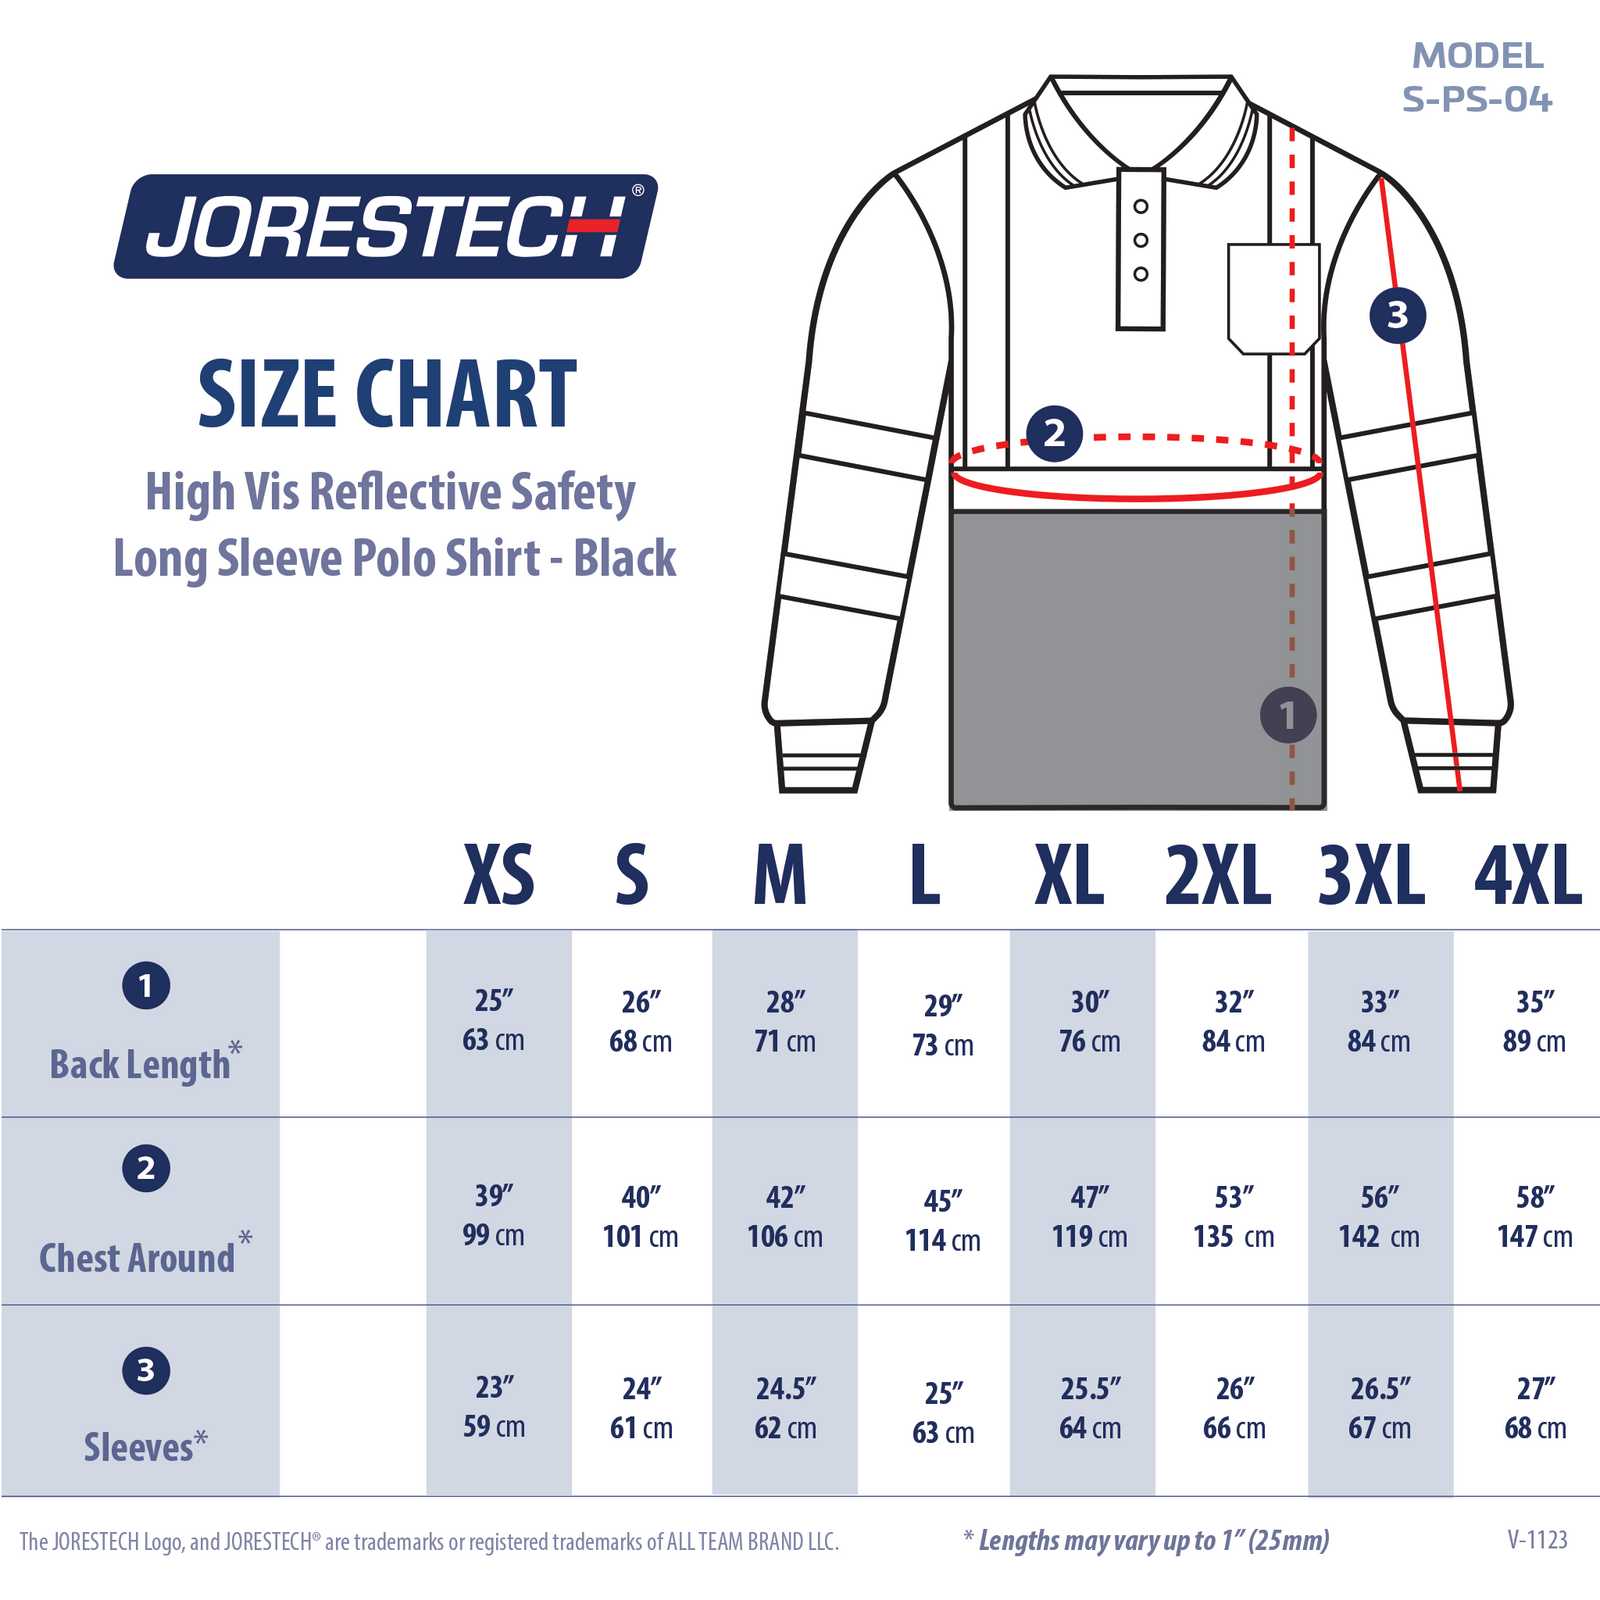 Size chart of the hi vis reflective safety long sleeve polo shirt by JORESTECH®